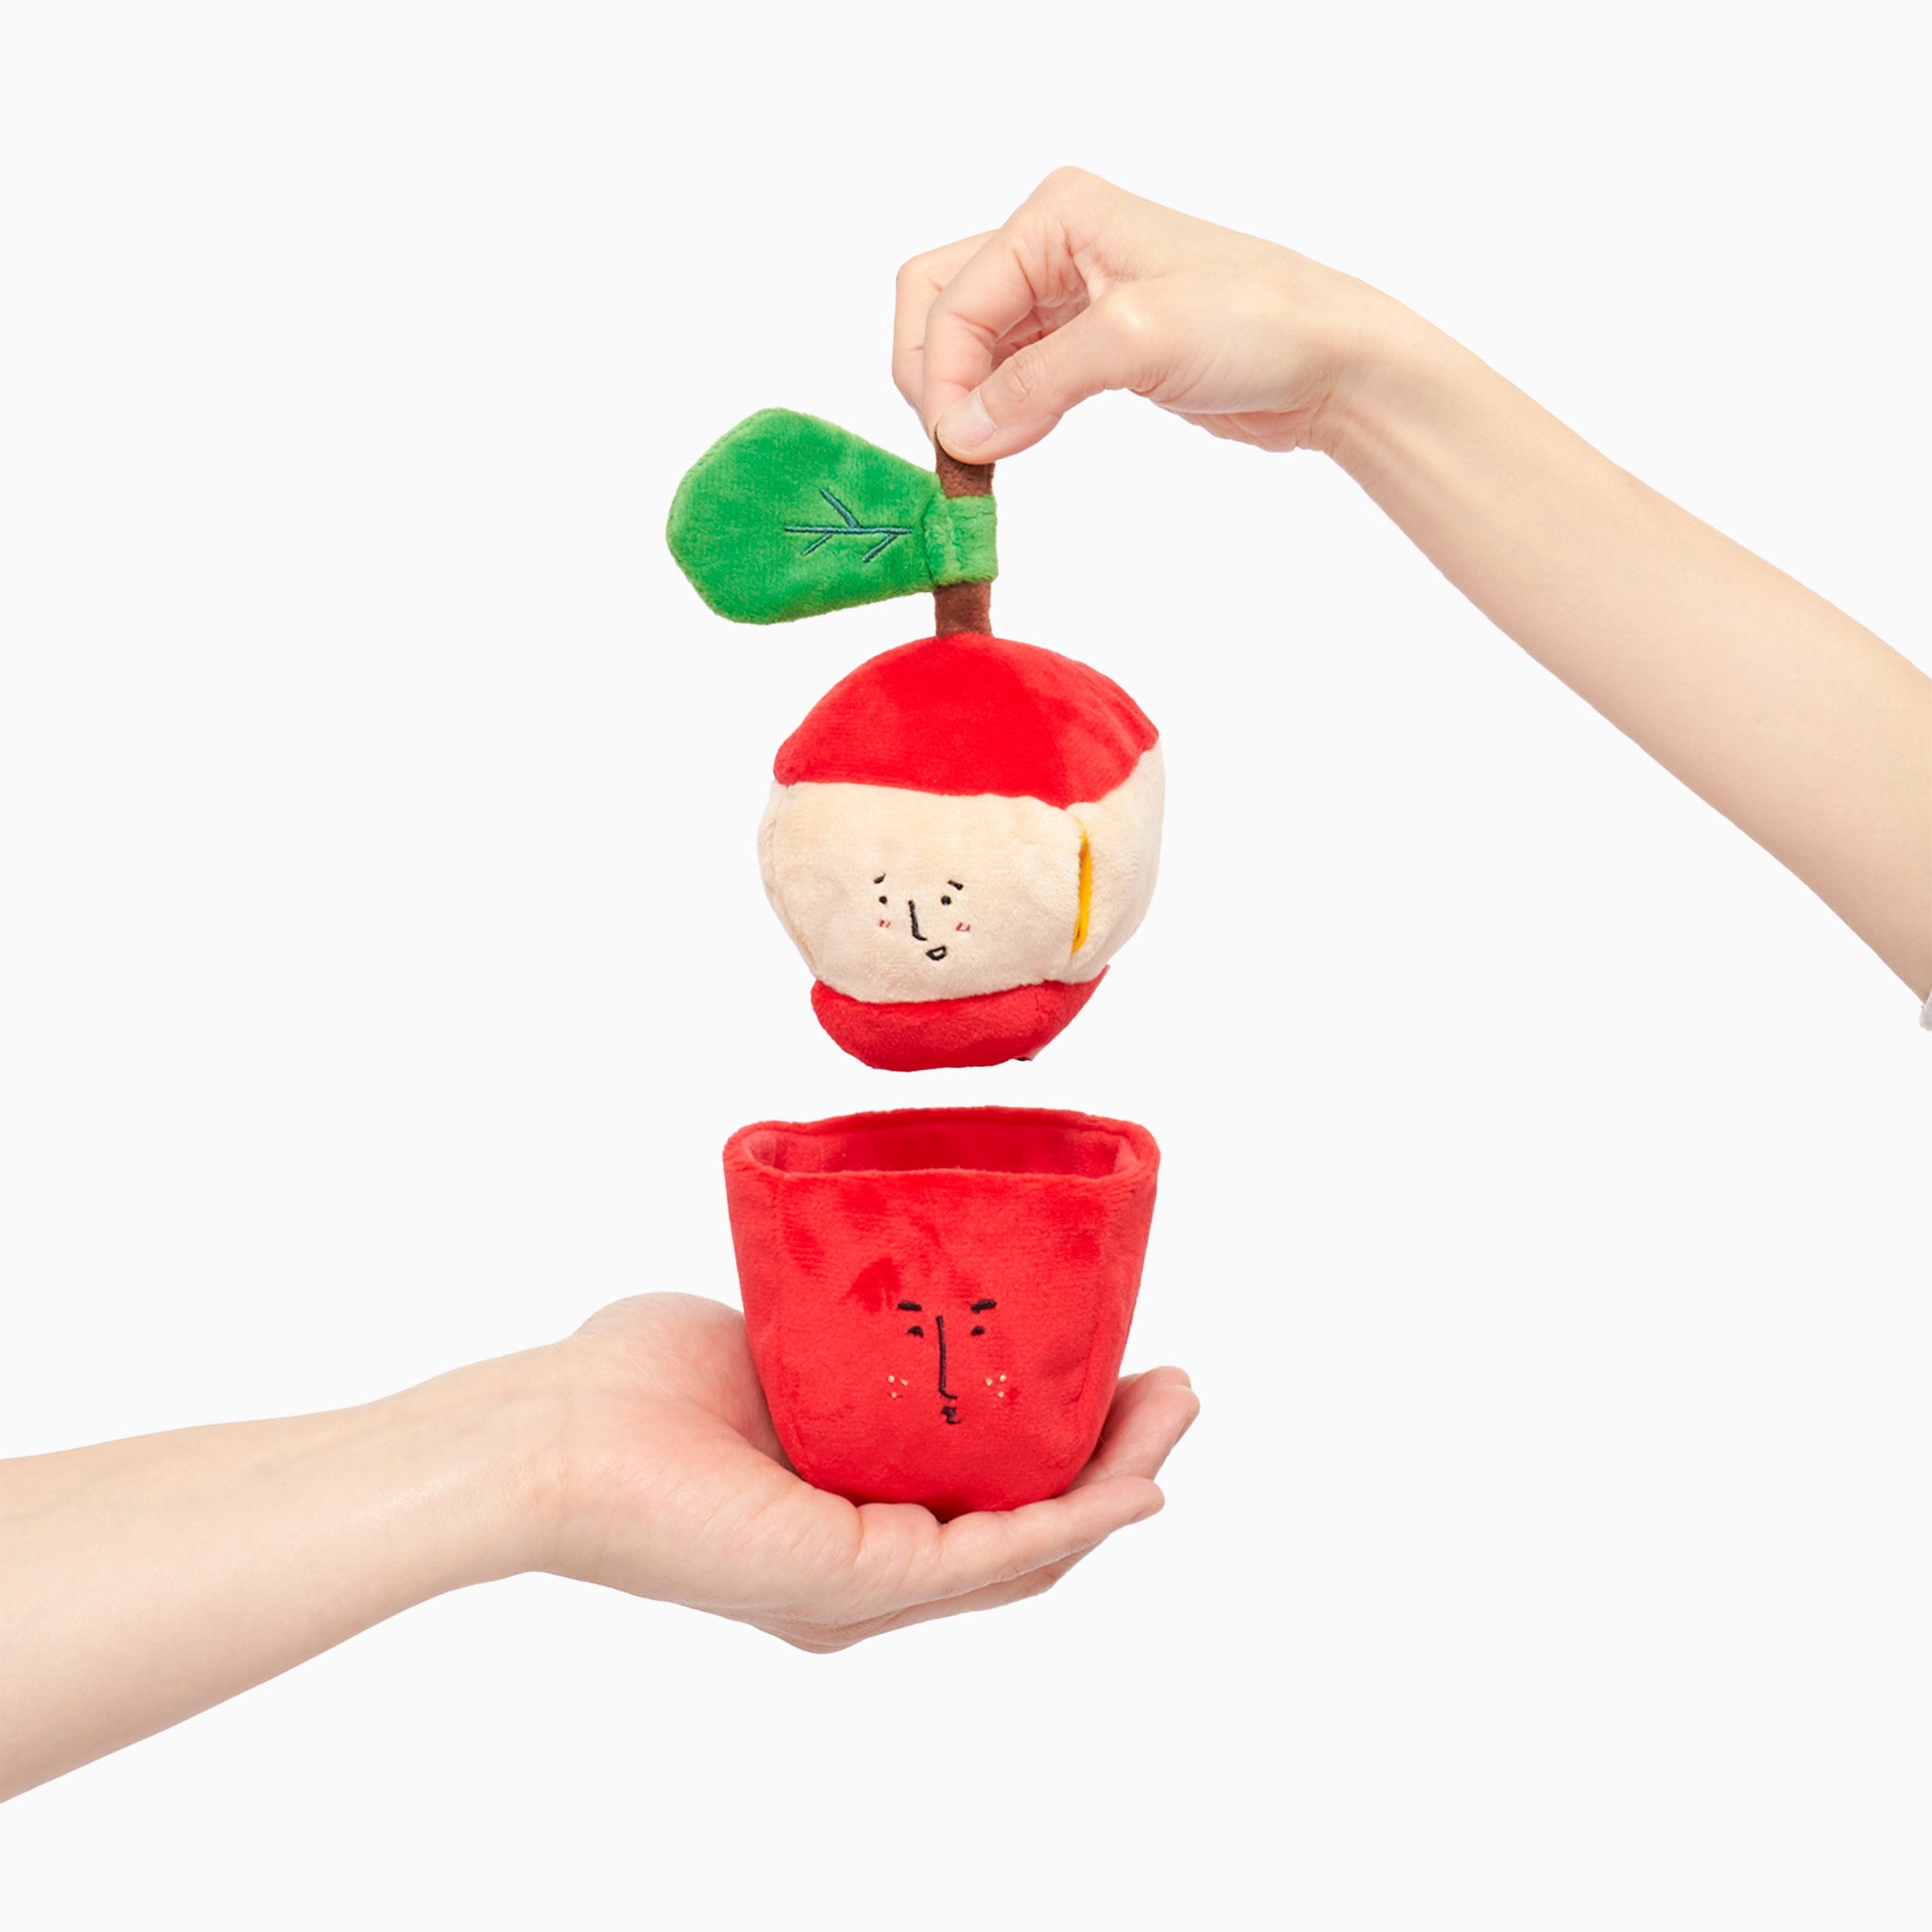 Two hands holding parts of a red and white apple-shaped dog toy with a cute face; one hand holds the top with the green leaf, and the other hand holds the bottom on a white background.